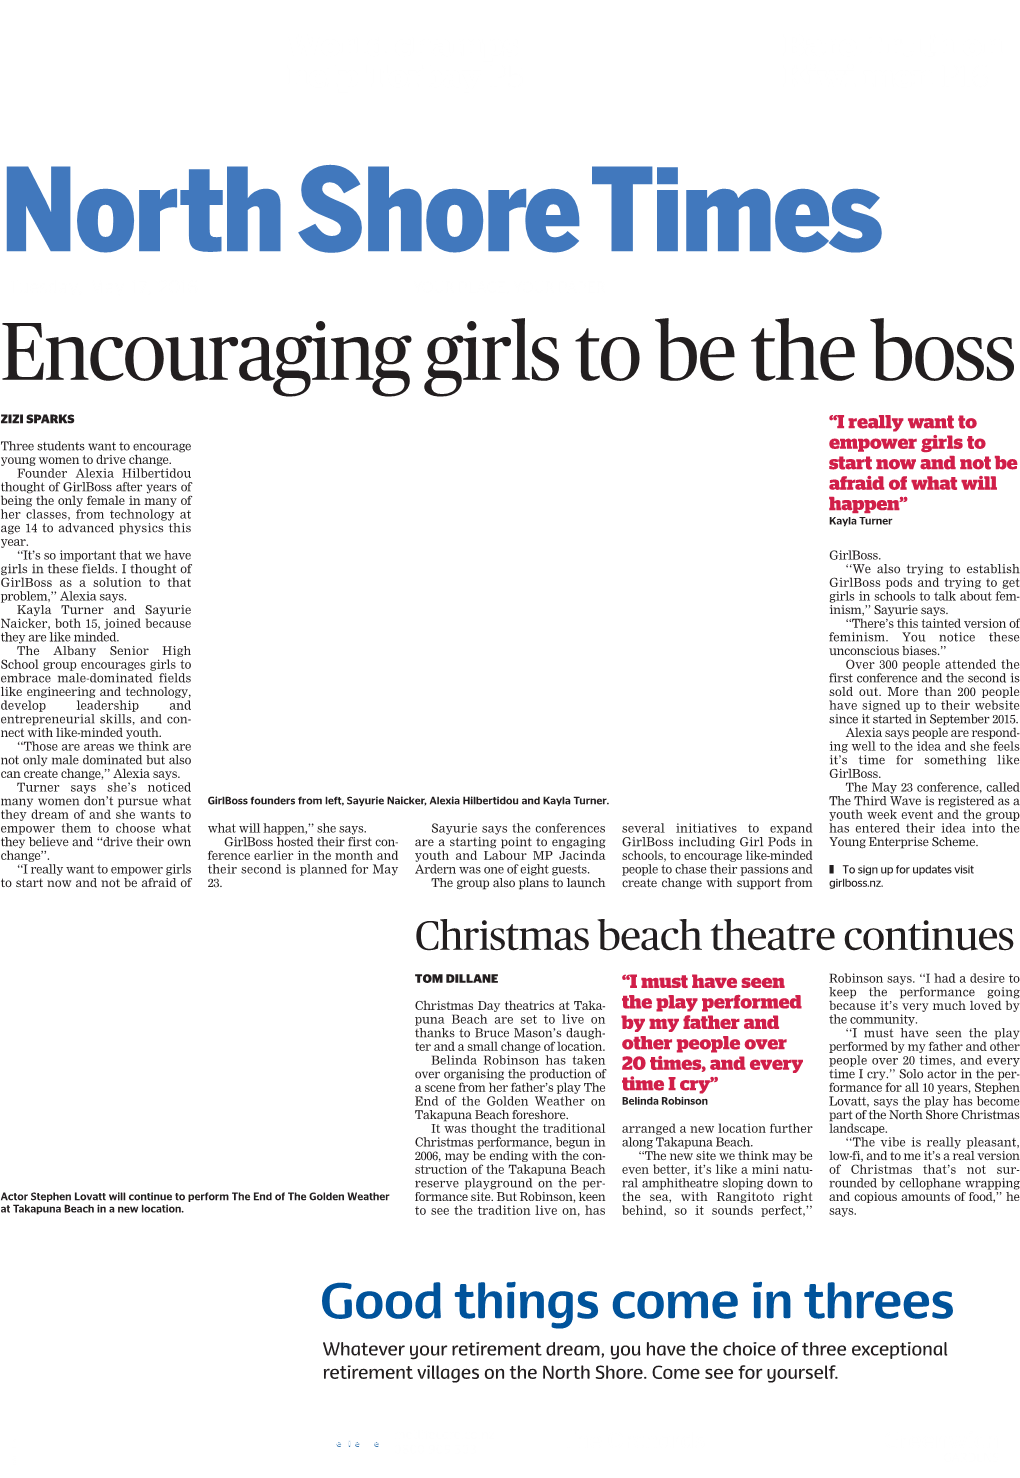 Encouraging Girls to Be the Boss